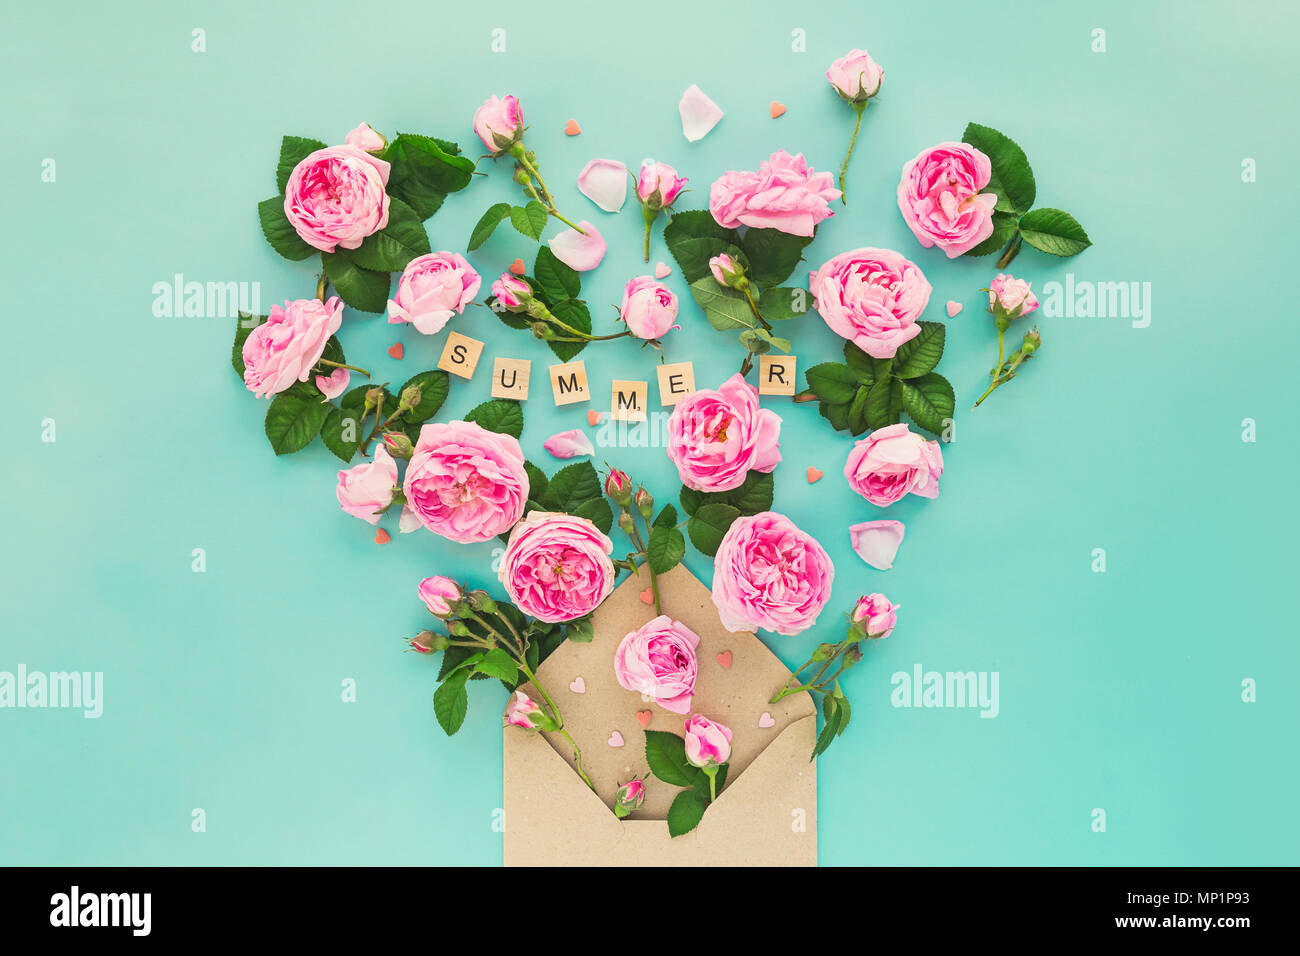 Creative layout with pink tea rose flowers, leaves fly out of croped craft paper envelope in shape of heart on the light turquoise background. Word Summer lettering by wooden letters. Space for text. Stock Photo